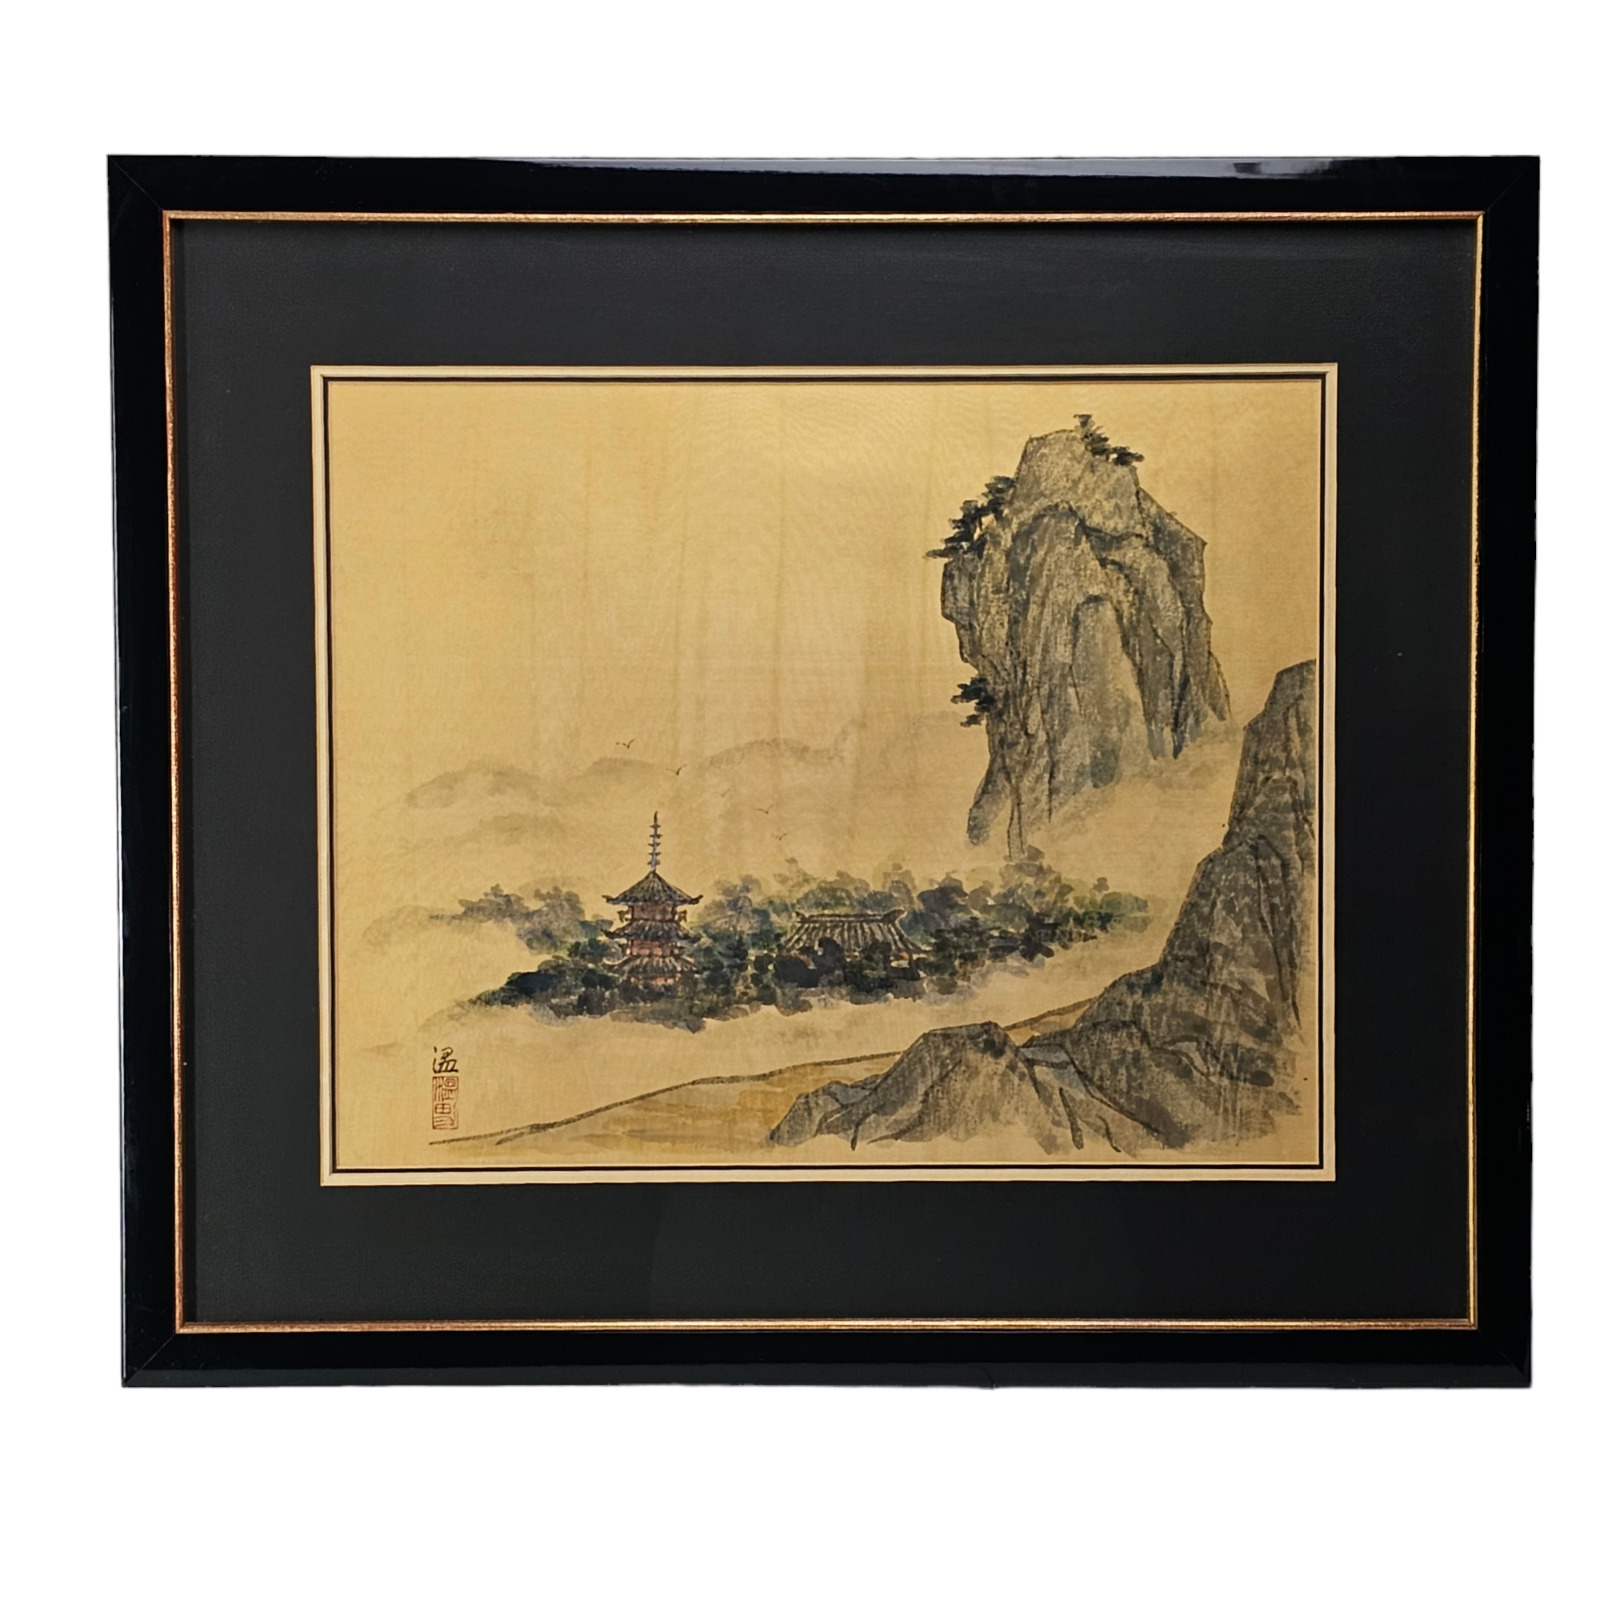 Vintage Chinese Silk Painted Landscape Black Gold Beautifully Framed